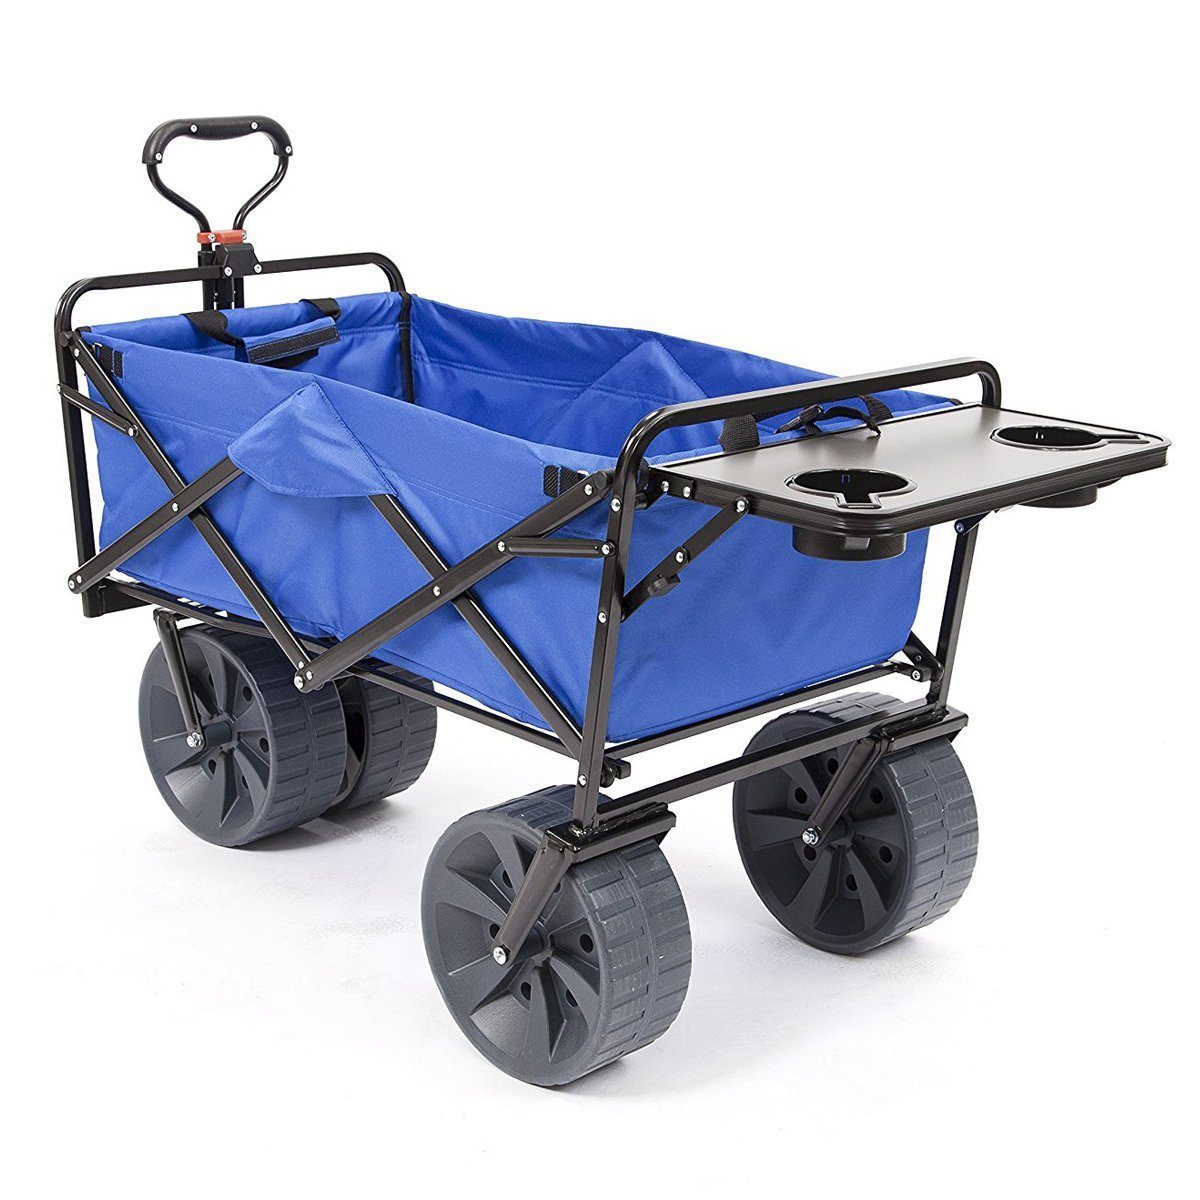 All-Terrain Beach Wagon By Mac Sports. With Side Table.